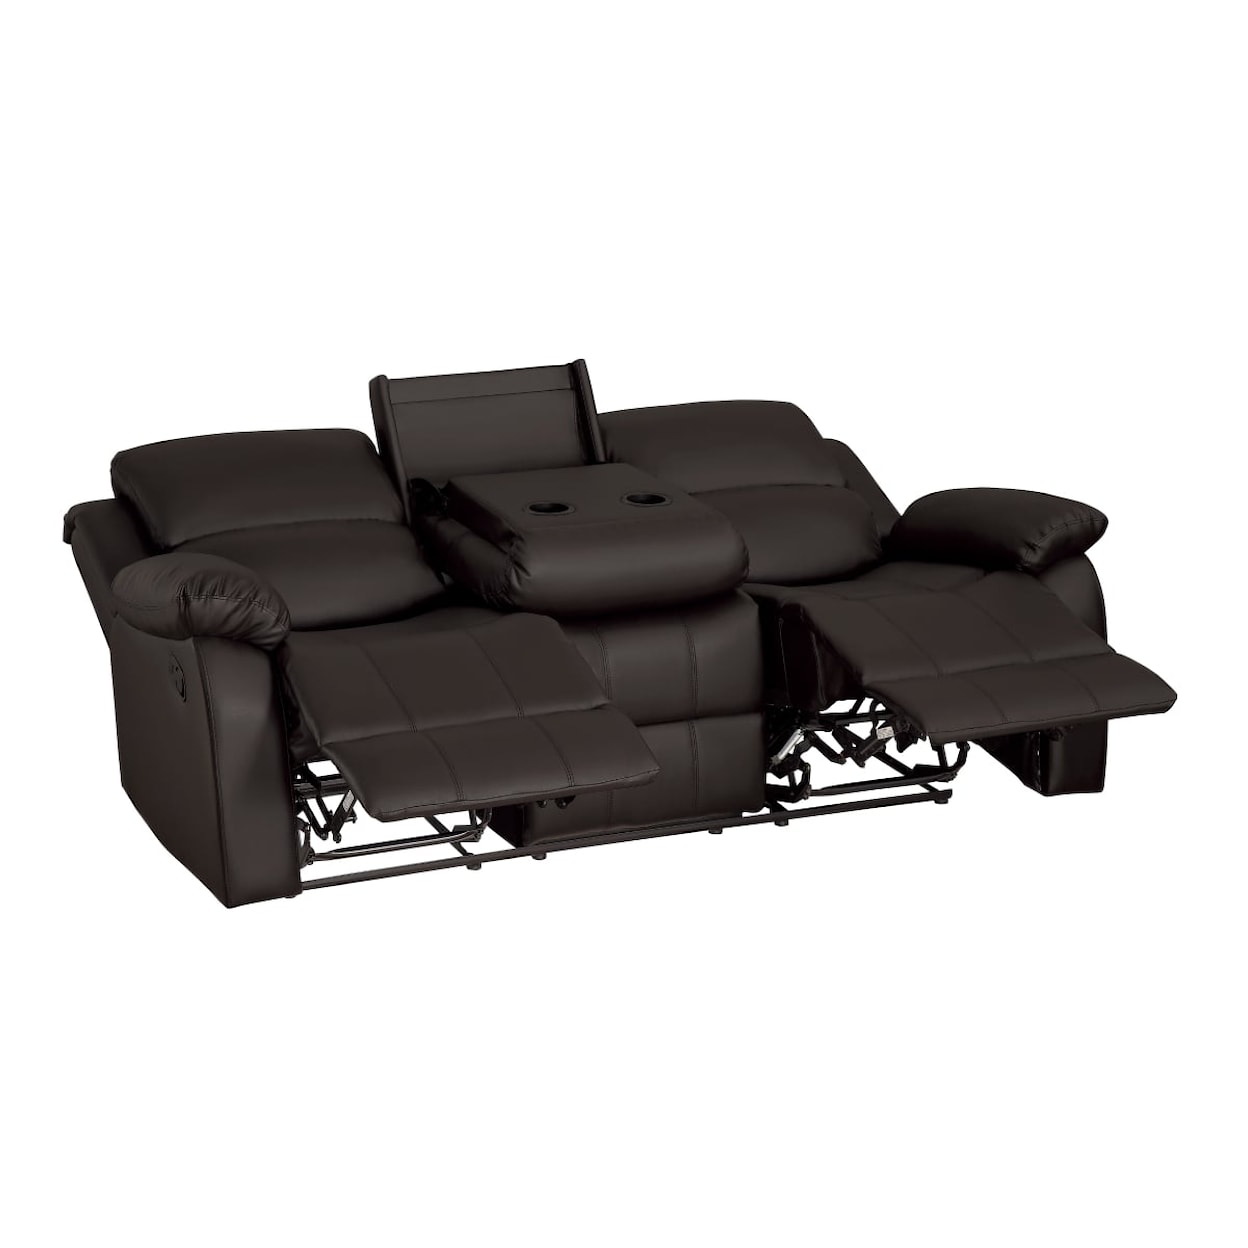 Homelegance Clarkdale Double Reclining Sofa